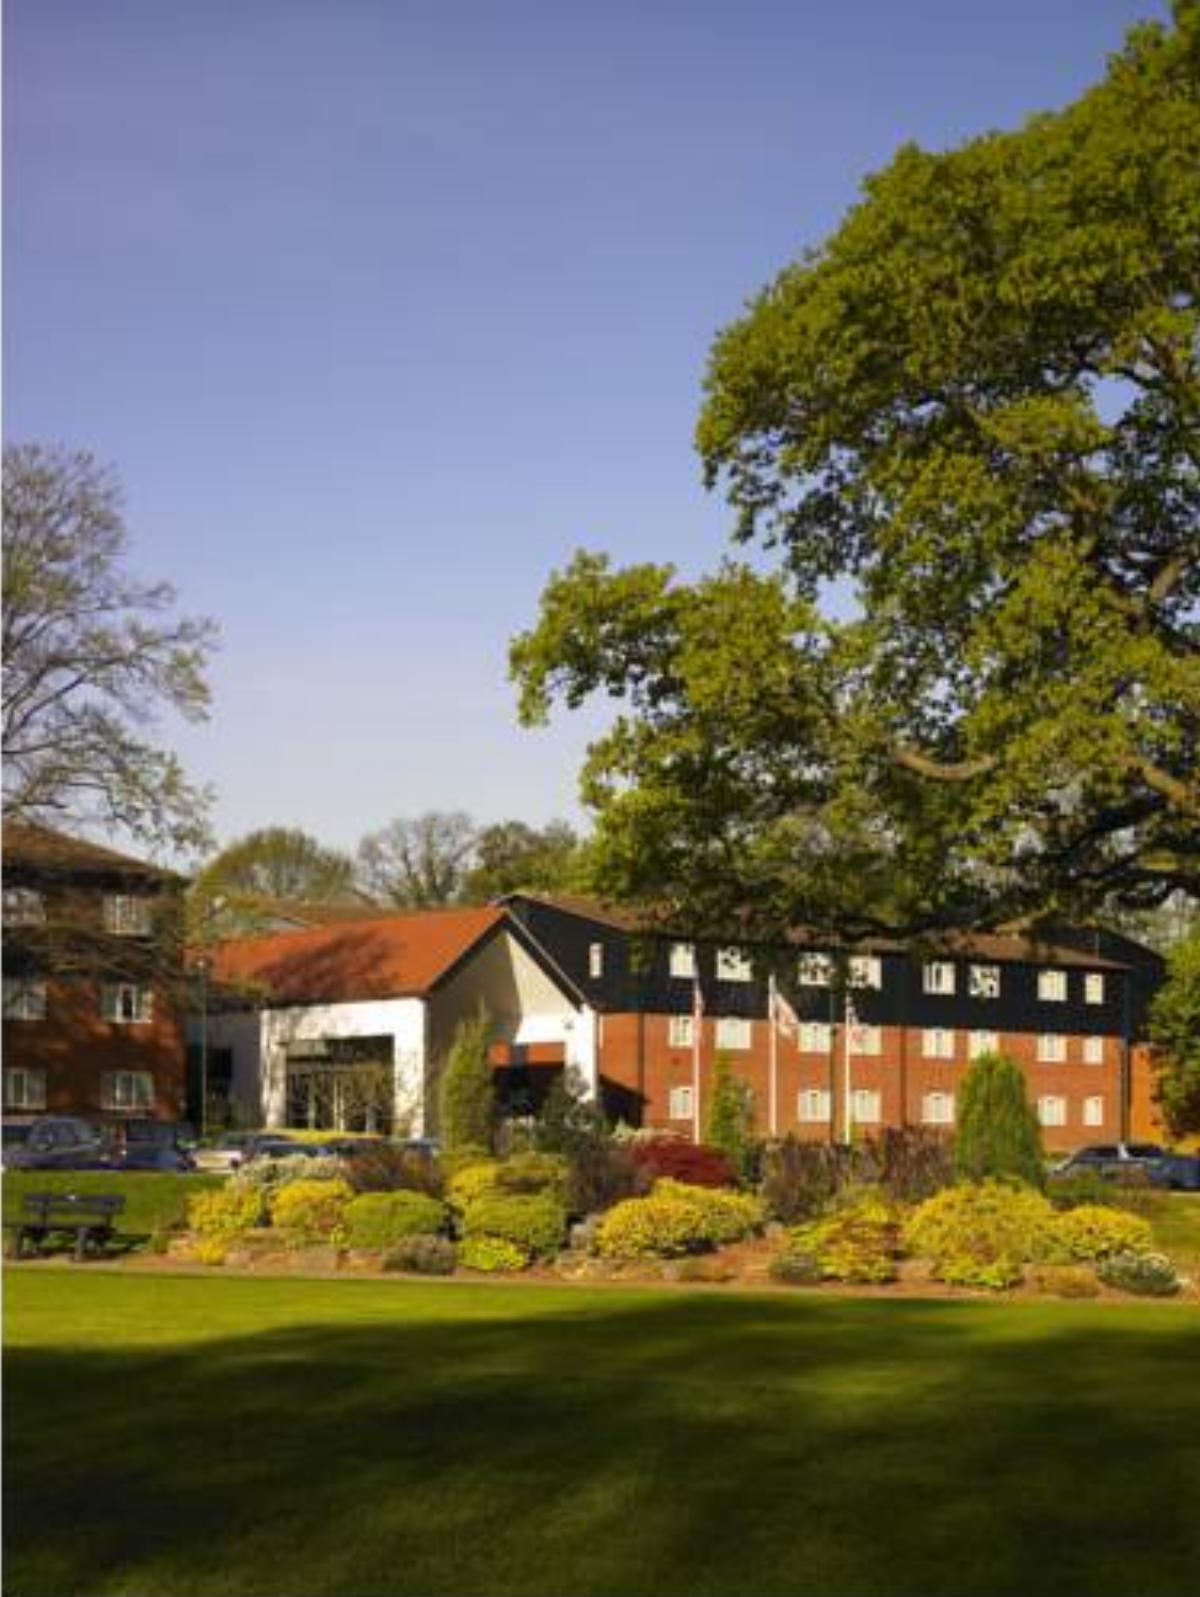 Meon Valley Marriott Hotel & Country Club Hotel Shedfield United Kingdom